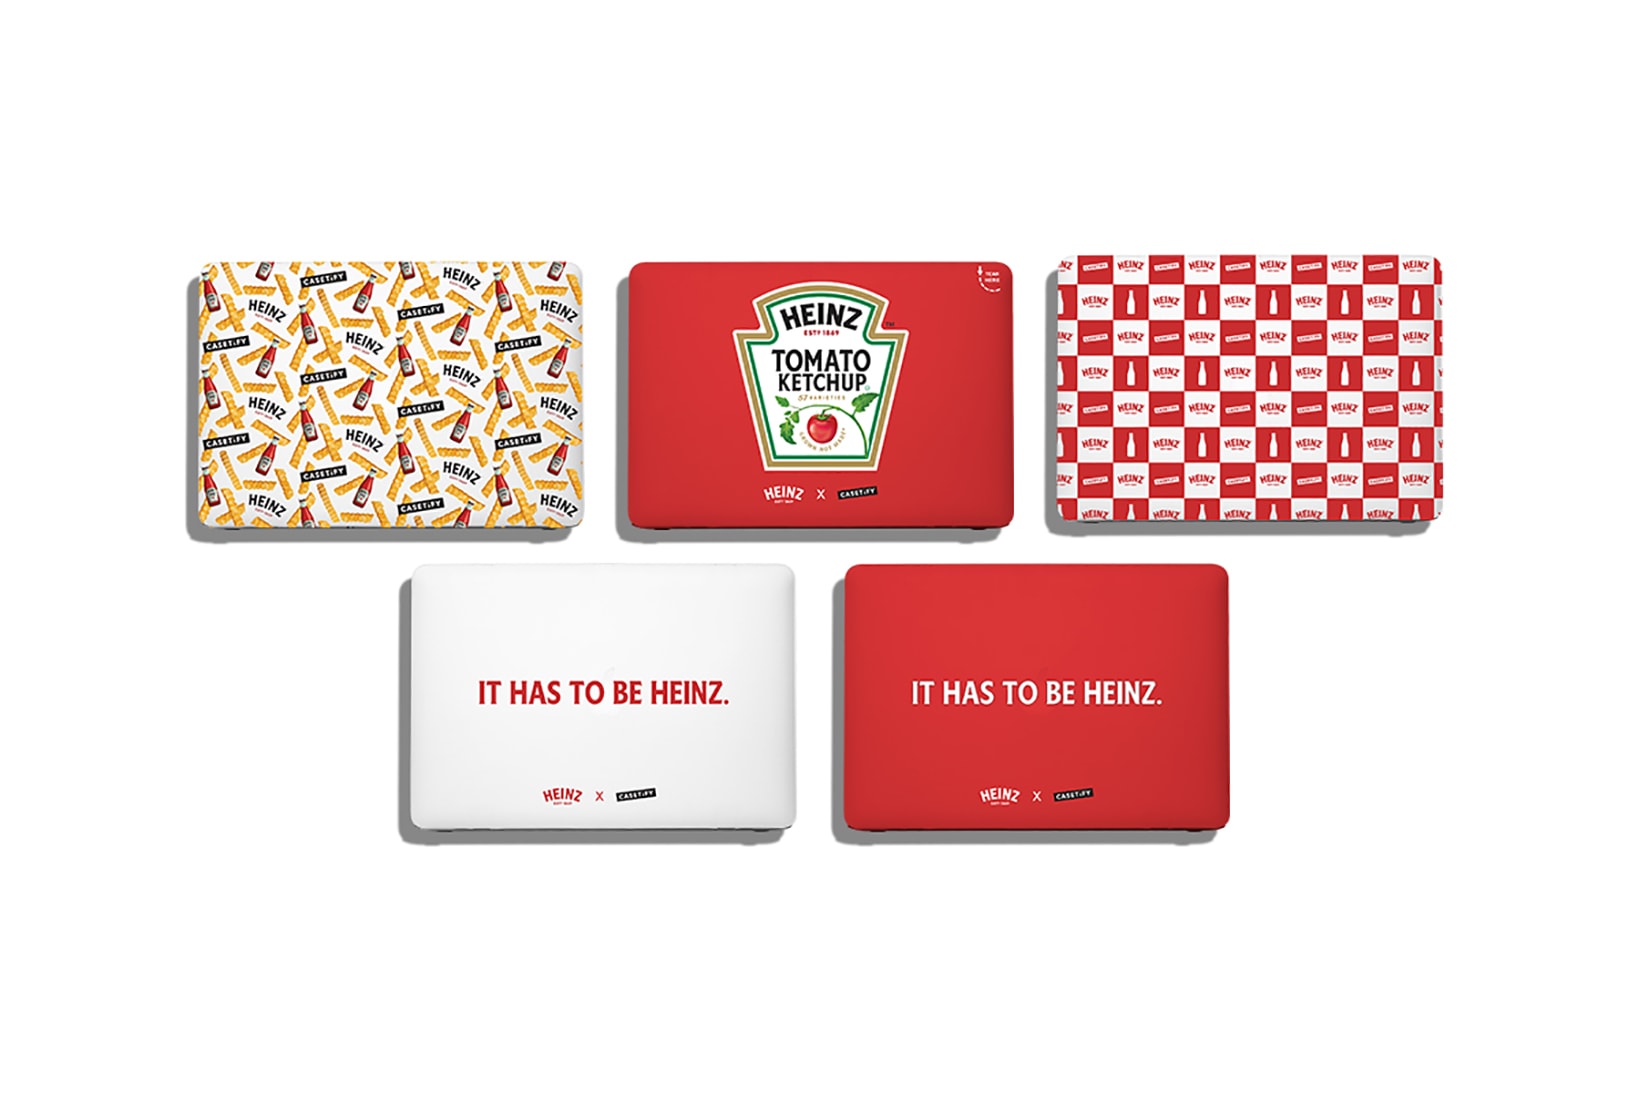 casetify heinz collaboration national ketchup day phone cases apple iphone samsung android airpods pro 